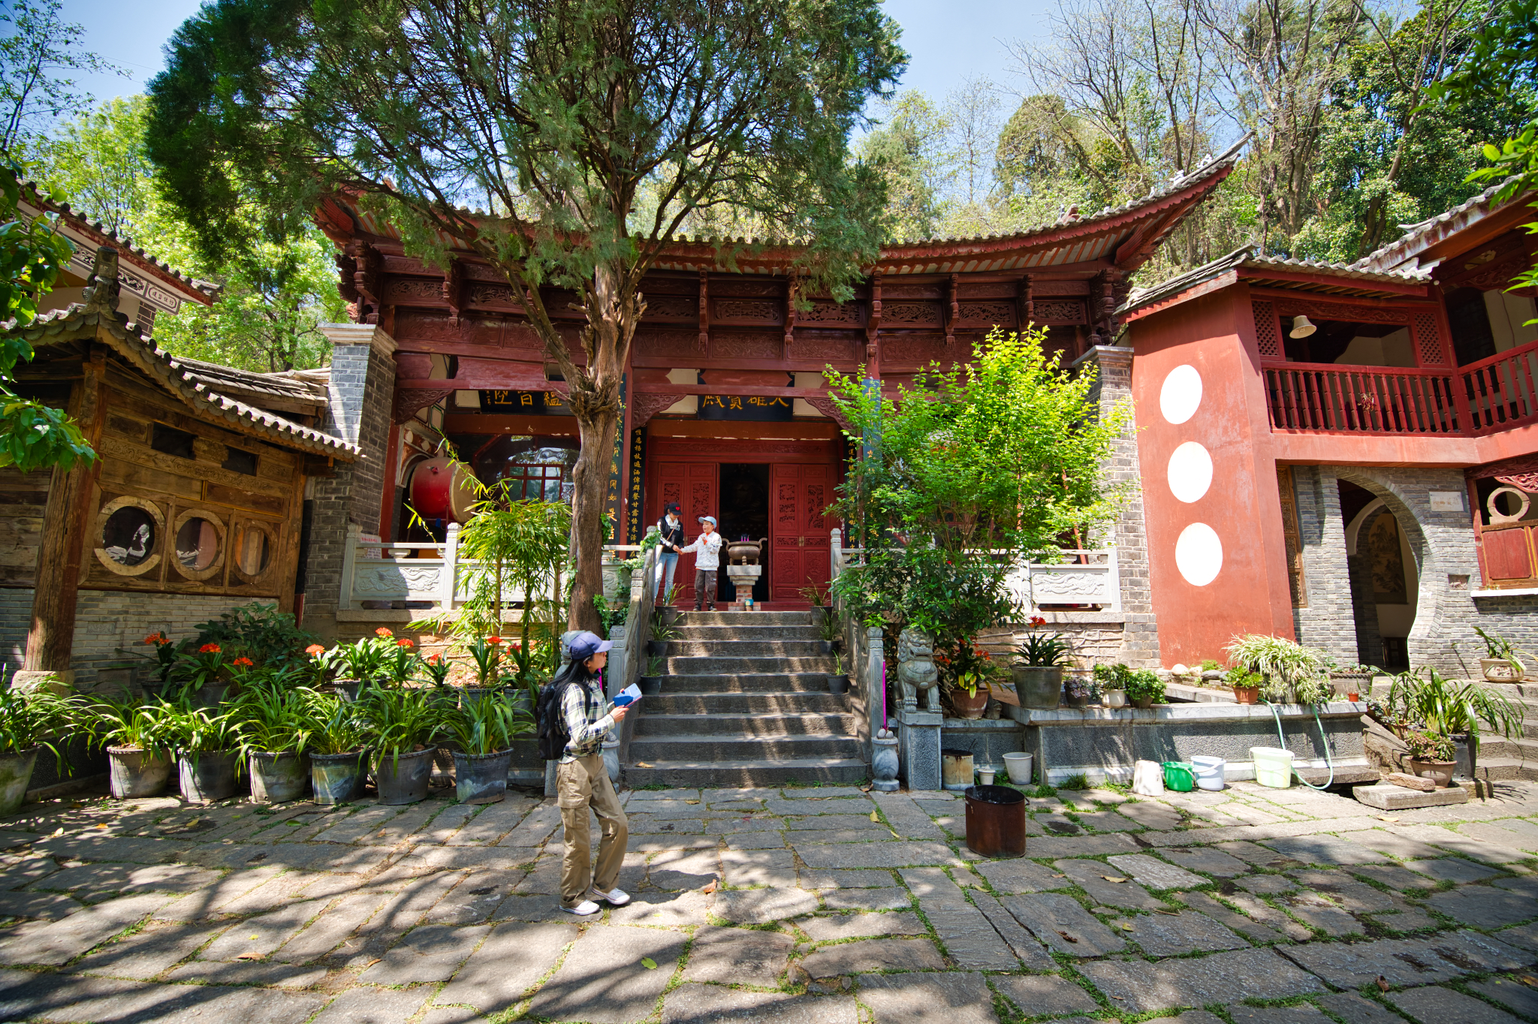 Picture: Buddhist temple near Fengyangyi 凤阳邑.